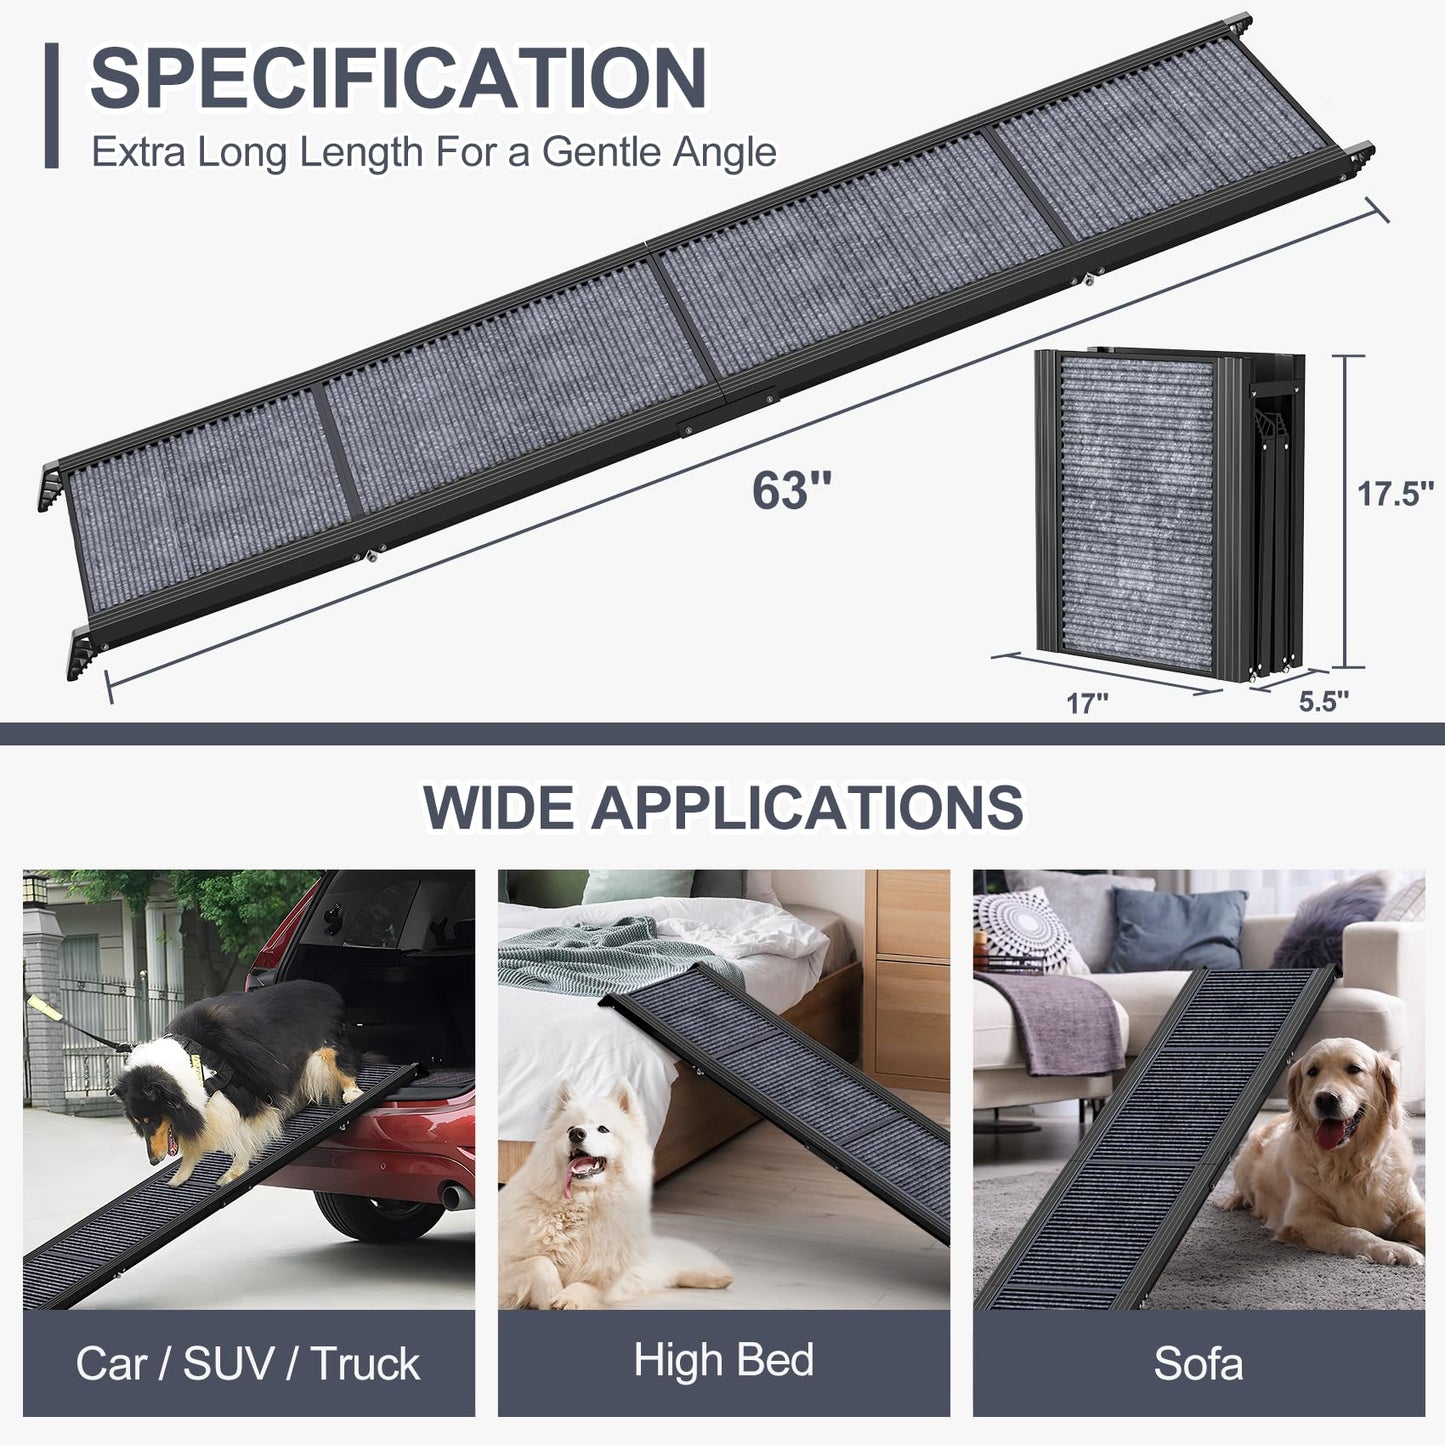 63" Long & 17" Wide Folding Portable Pet Stair Ramp with Non-Slip Rug Surface